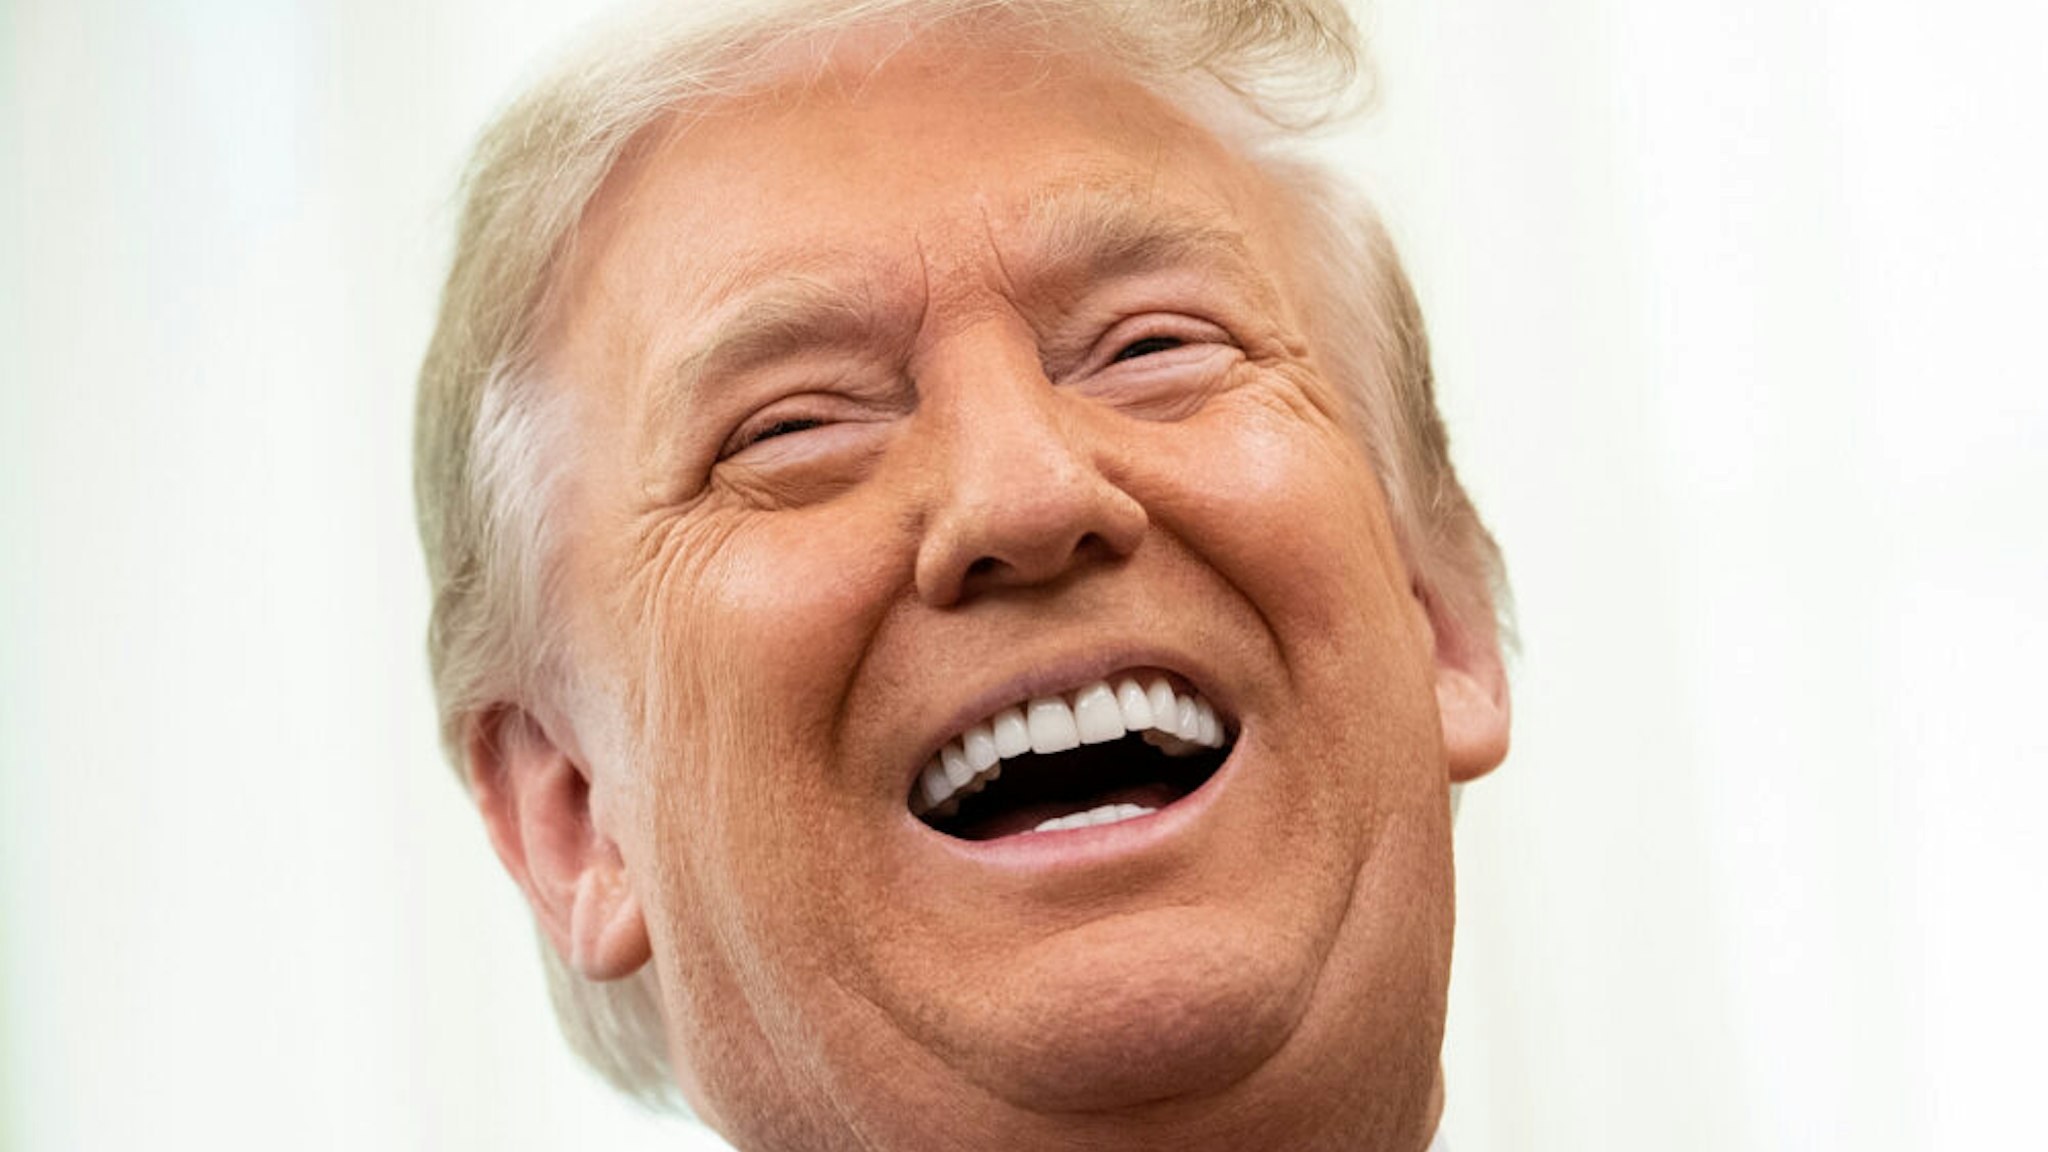 US President Donald Trump laughs during a Medal of Freedom ceremony for Lou Holtz in the Oval Office of the White House on December 3, 2020, in Washington, DC.